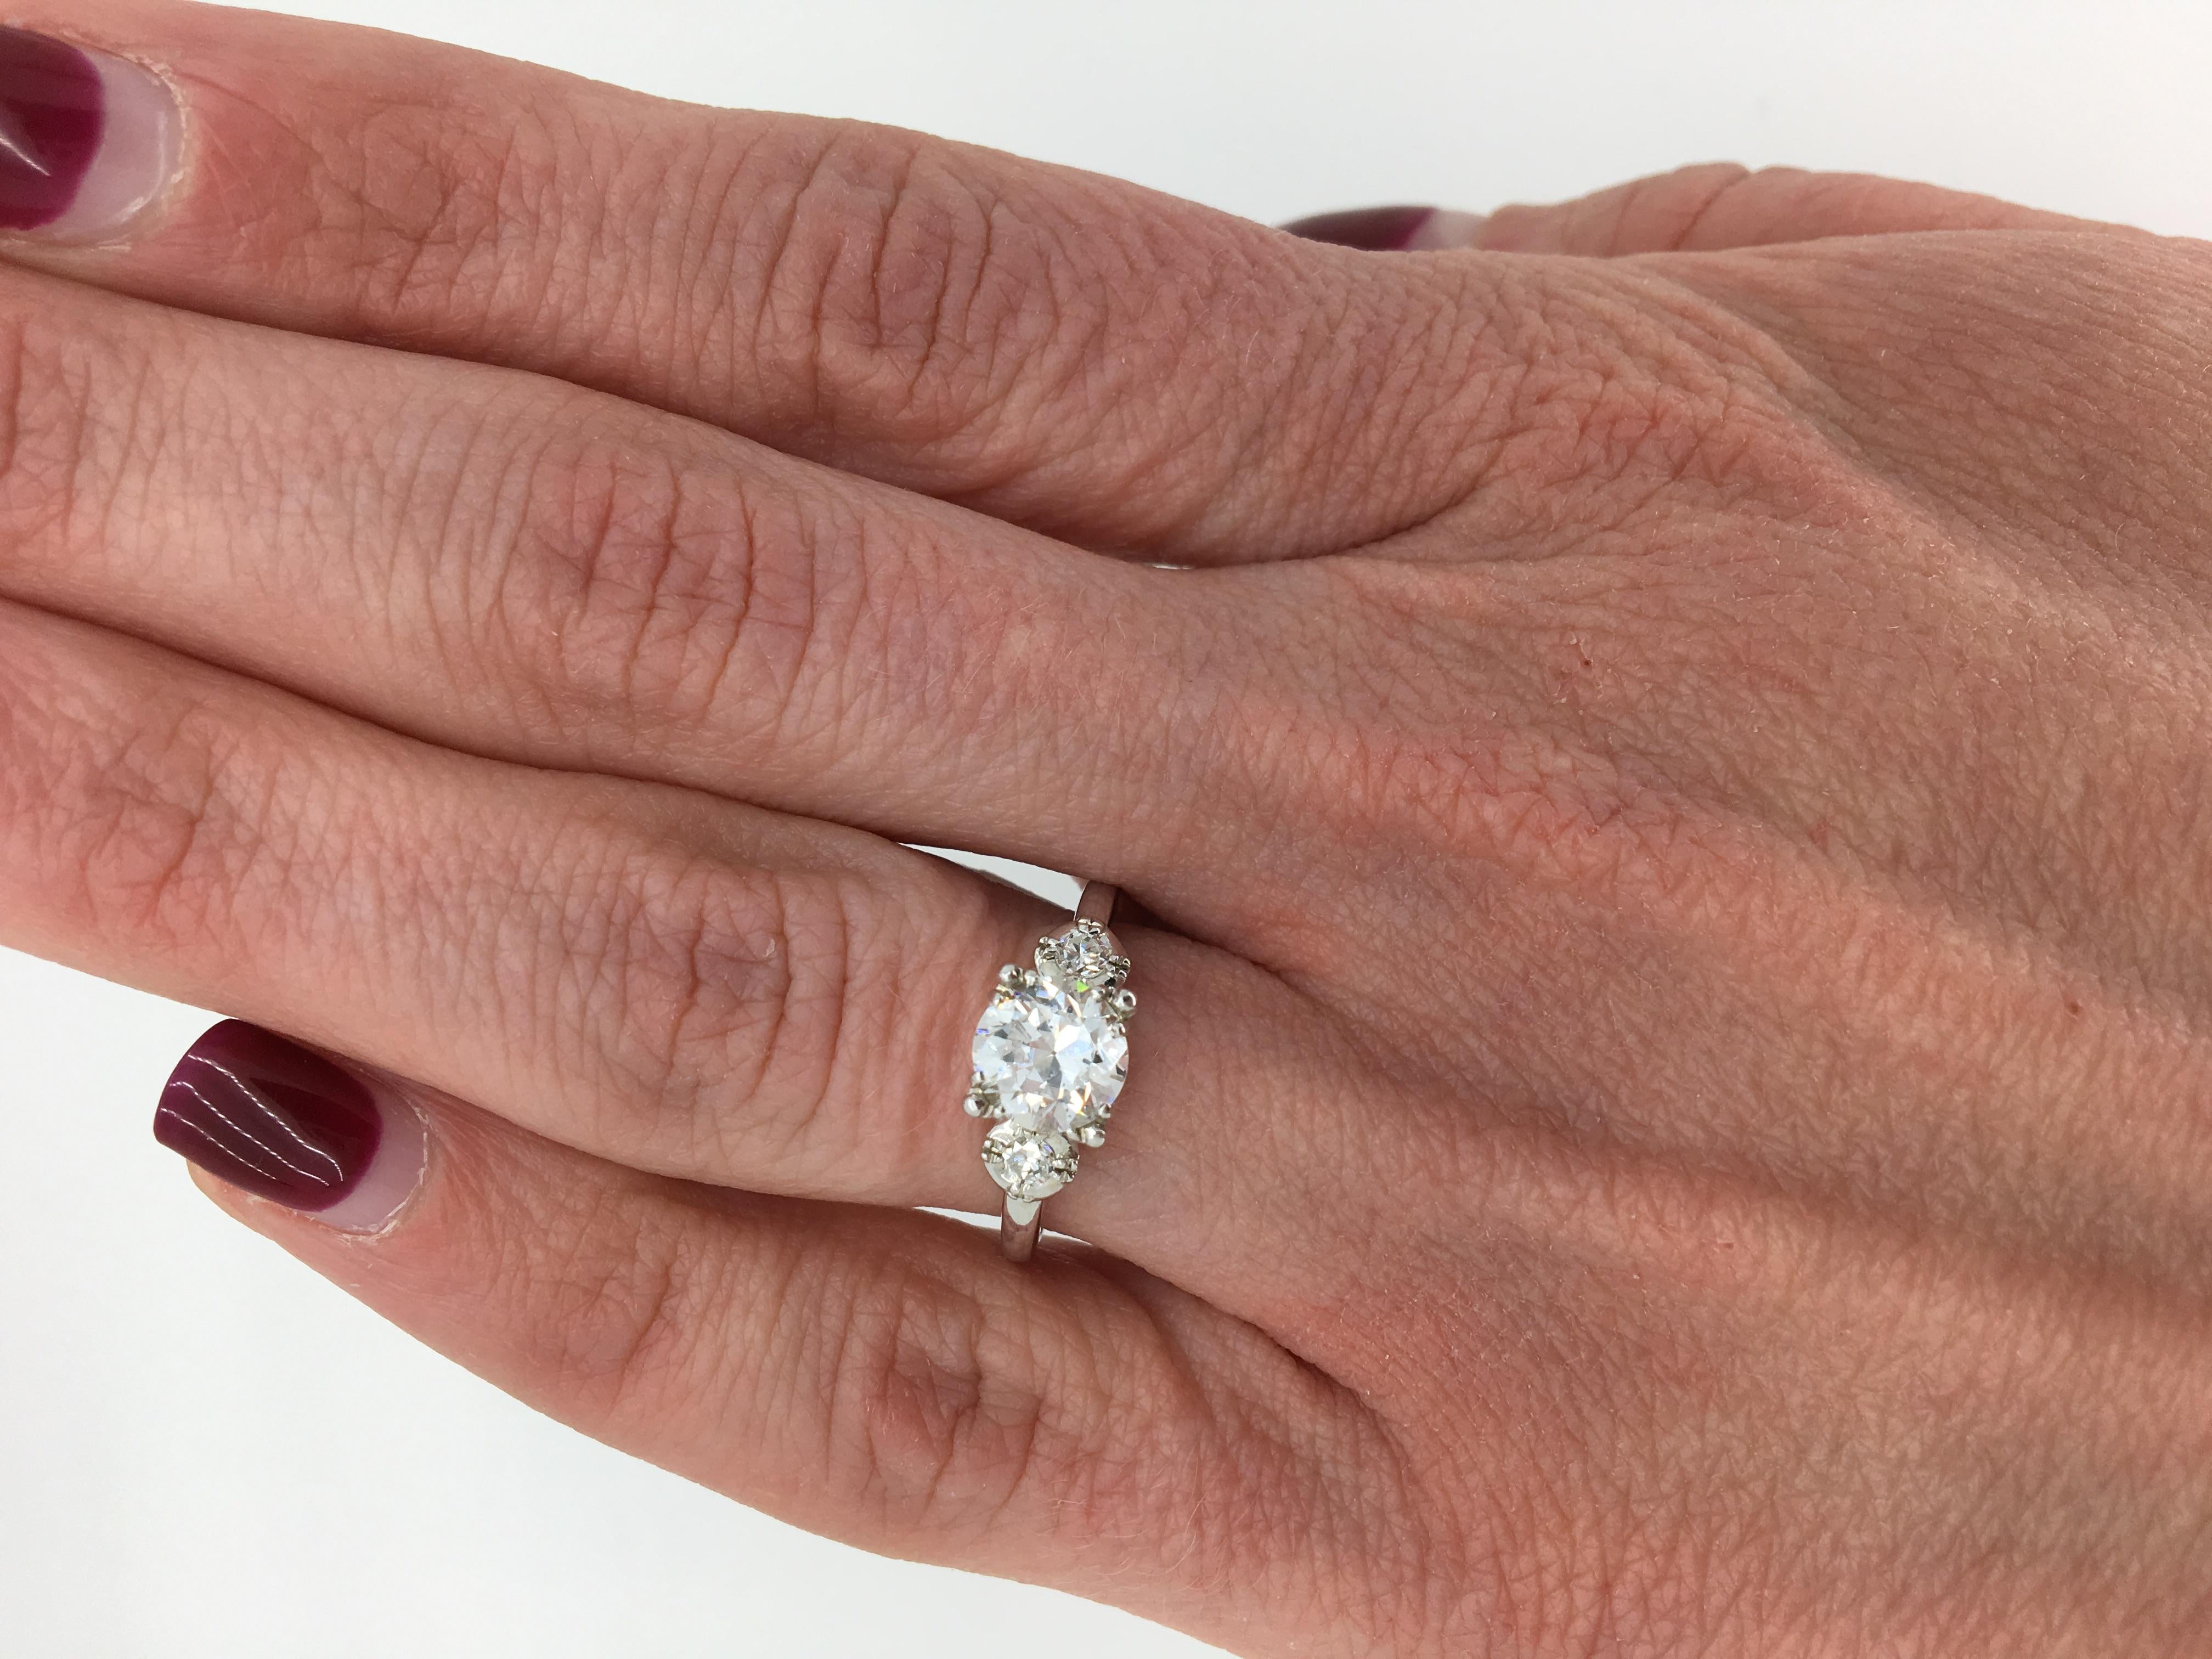 Vintage fishtail prong style engagement ring featuring and approximately 1.10CT Transitional Round Cut Diamond.

Center Diamond Carat Weight: Approximately 1.10CT
Center Diamond Cut: Round Transitional
Center Diamond Color:  G-H
Center Diamond